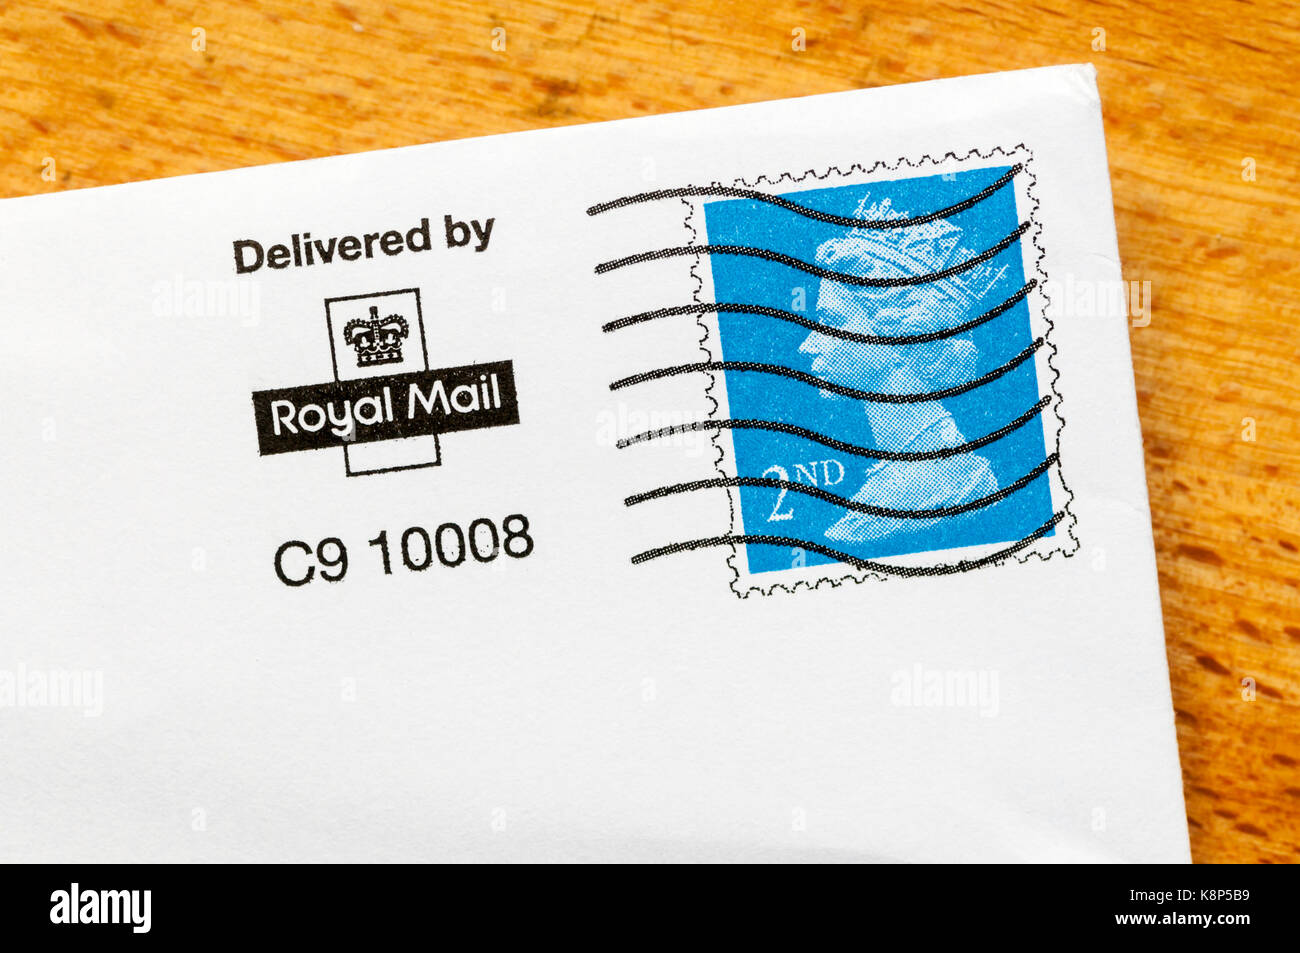 A pre-printed UK 2nd class postage stamp on an envelope. Stock Photo